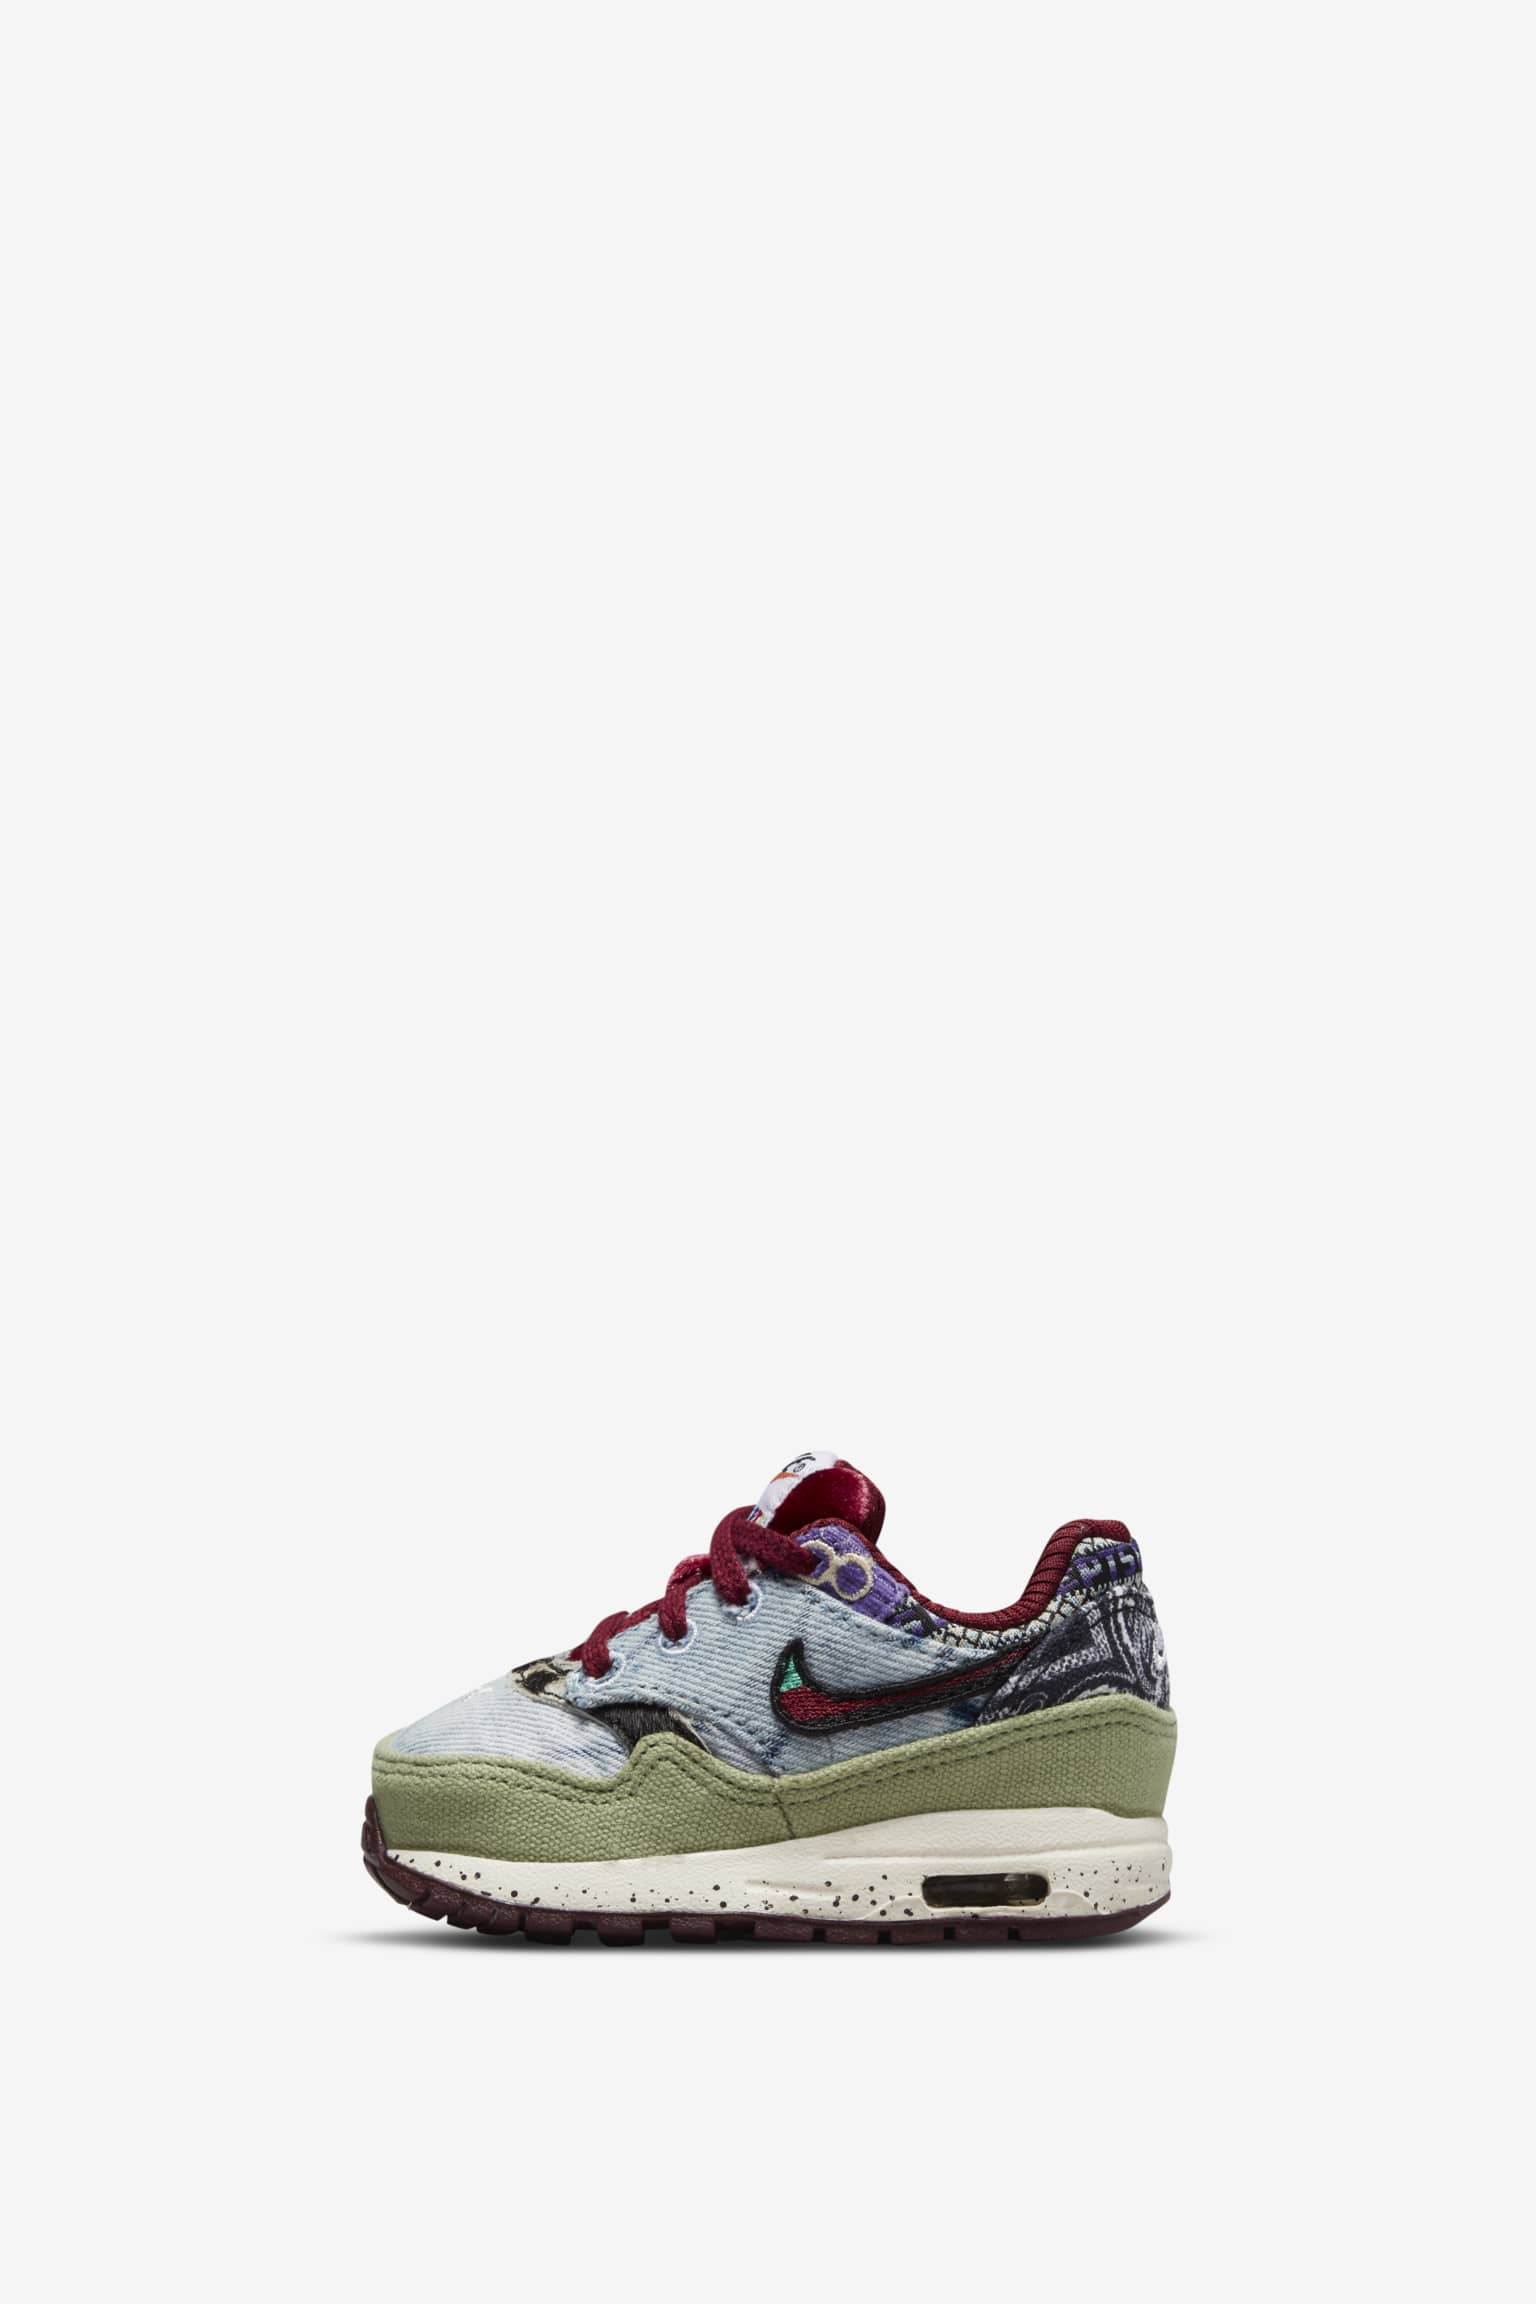 Concepts x Air Max 1 'Mellow' 發售日期. Nike SNKRS TW